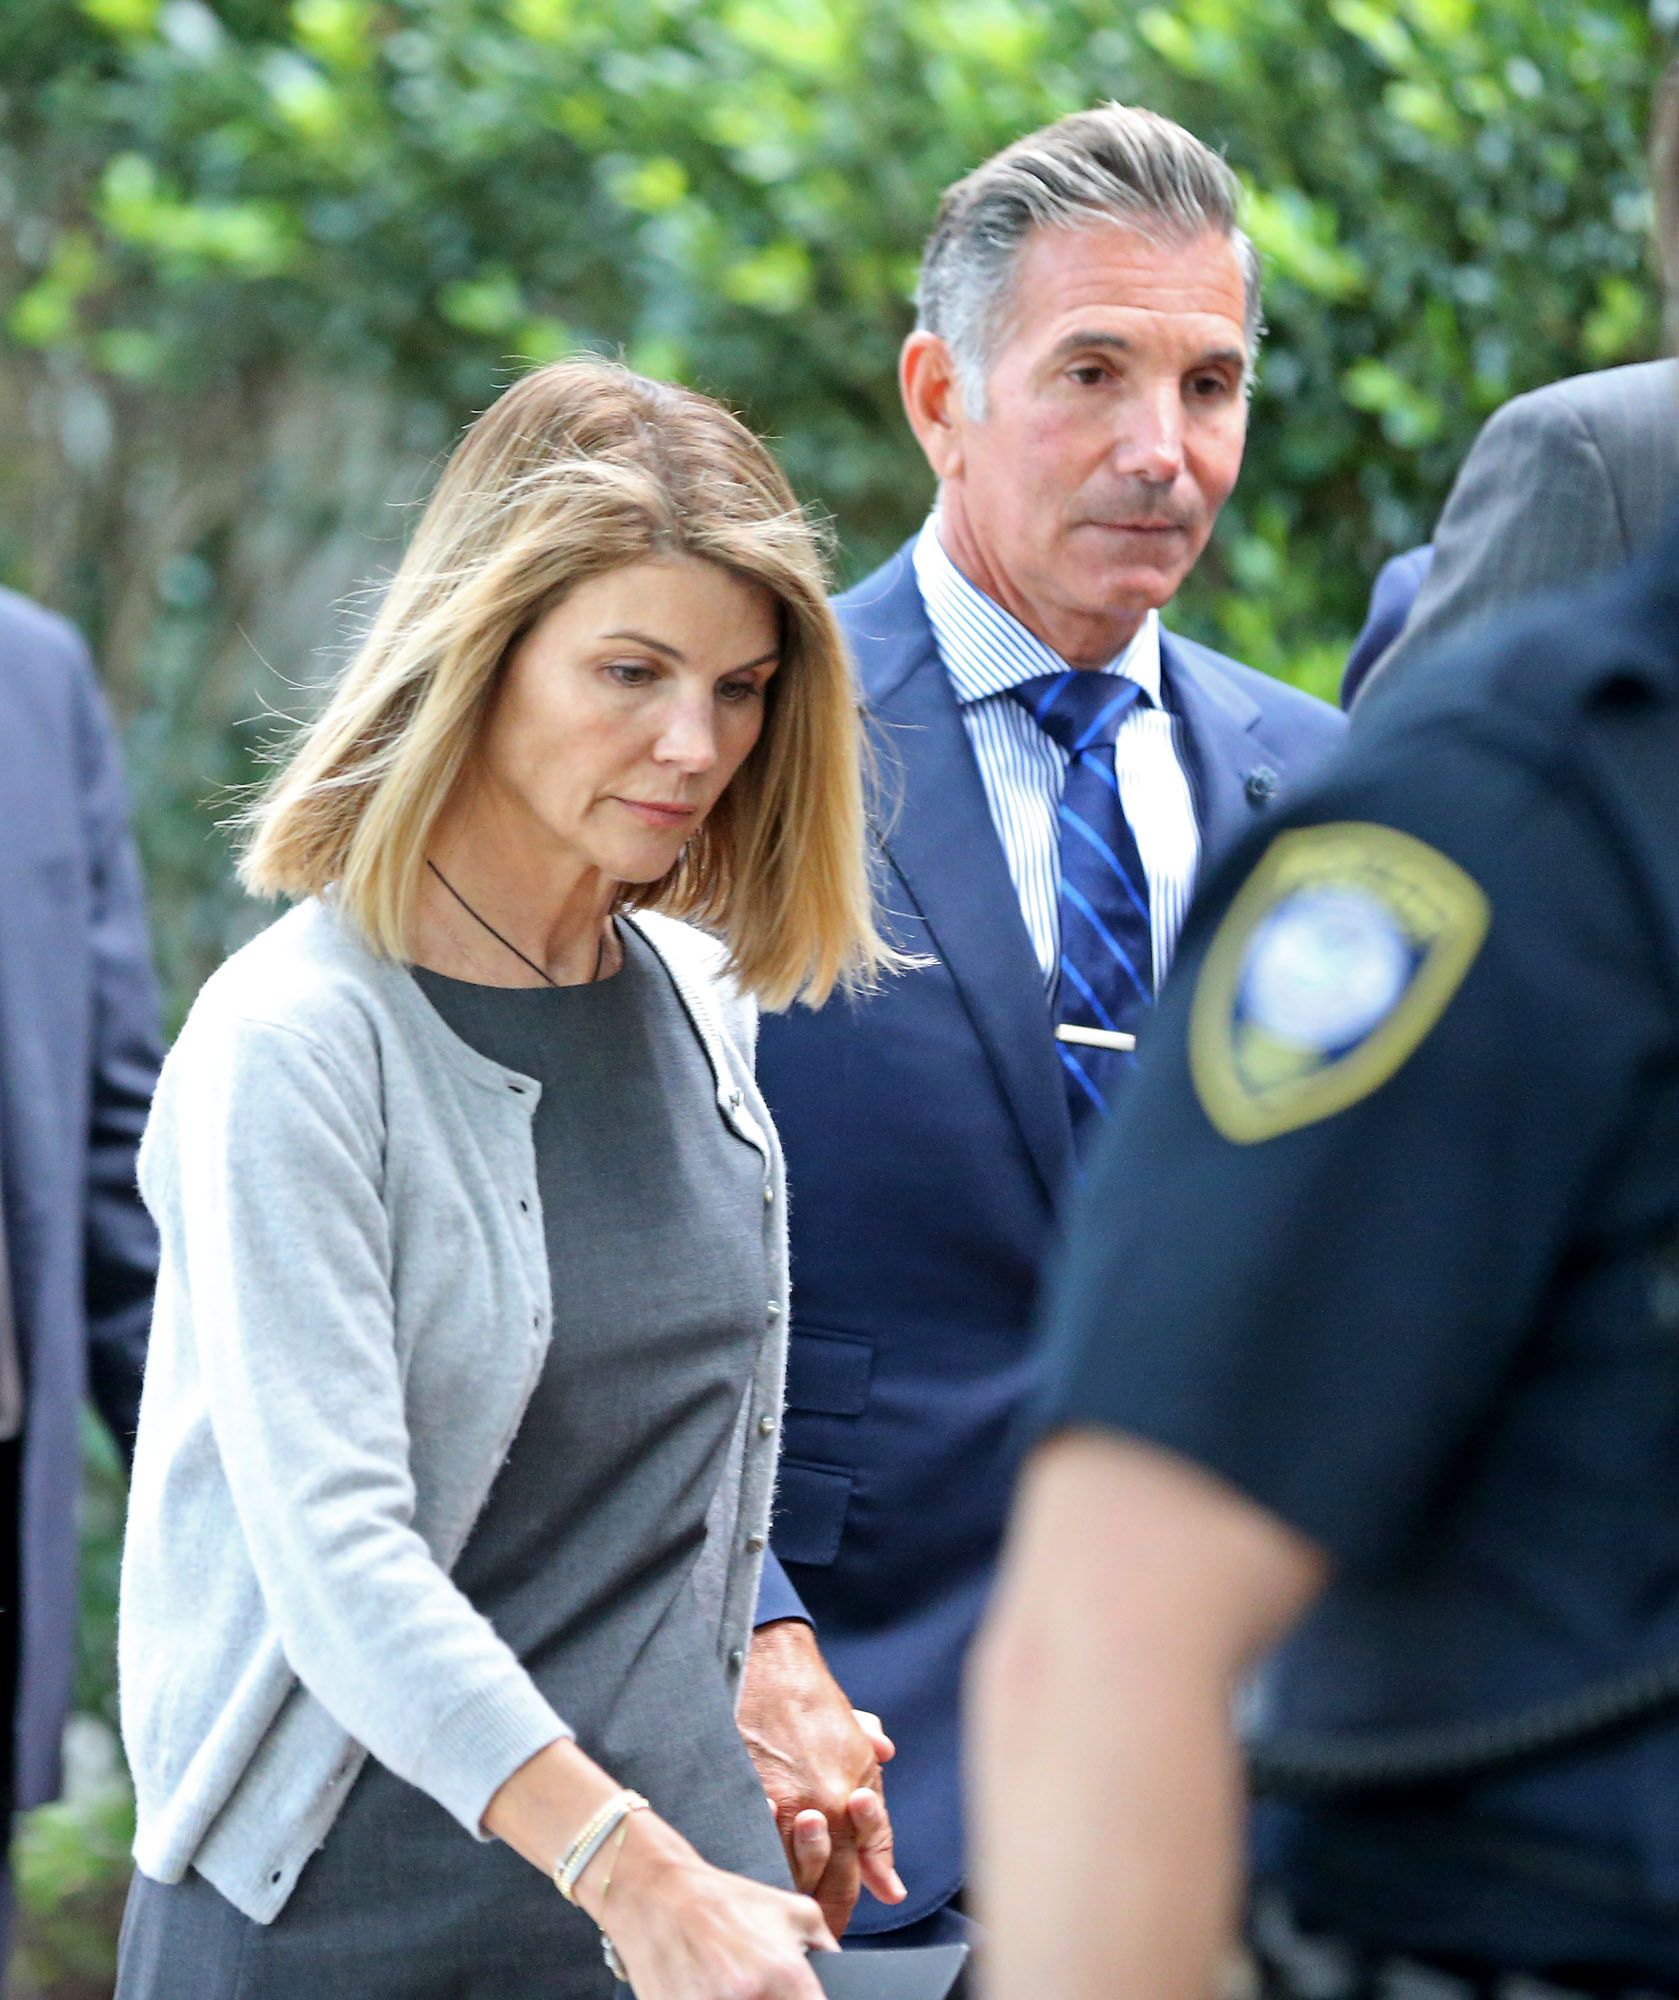 Lori Loughlin and Mossimo Giannulli leave Moakley Federal Courthousein Boston, Massachusetts | Photo: Stuart Cahill/MediaNews Group/Boston Herald via Getty Images